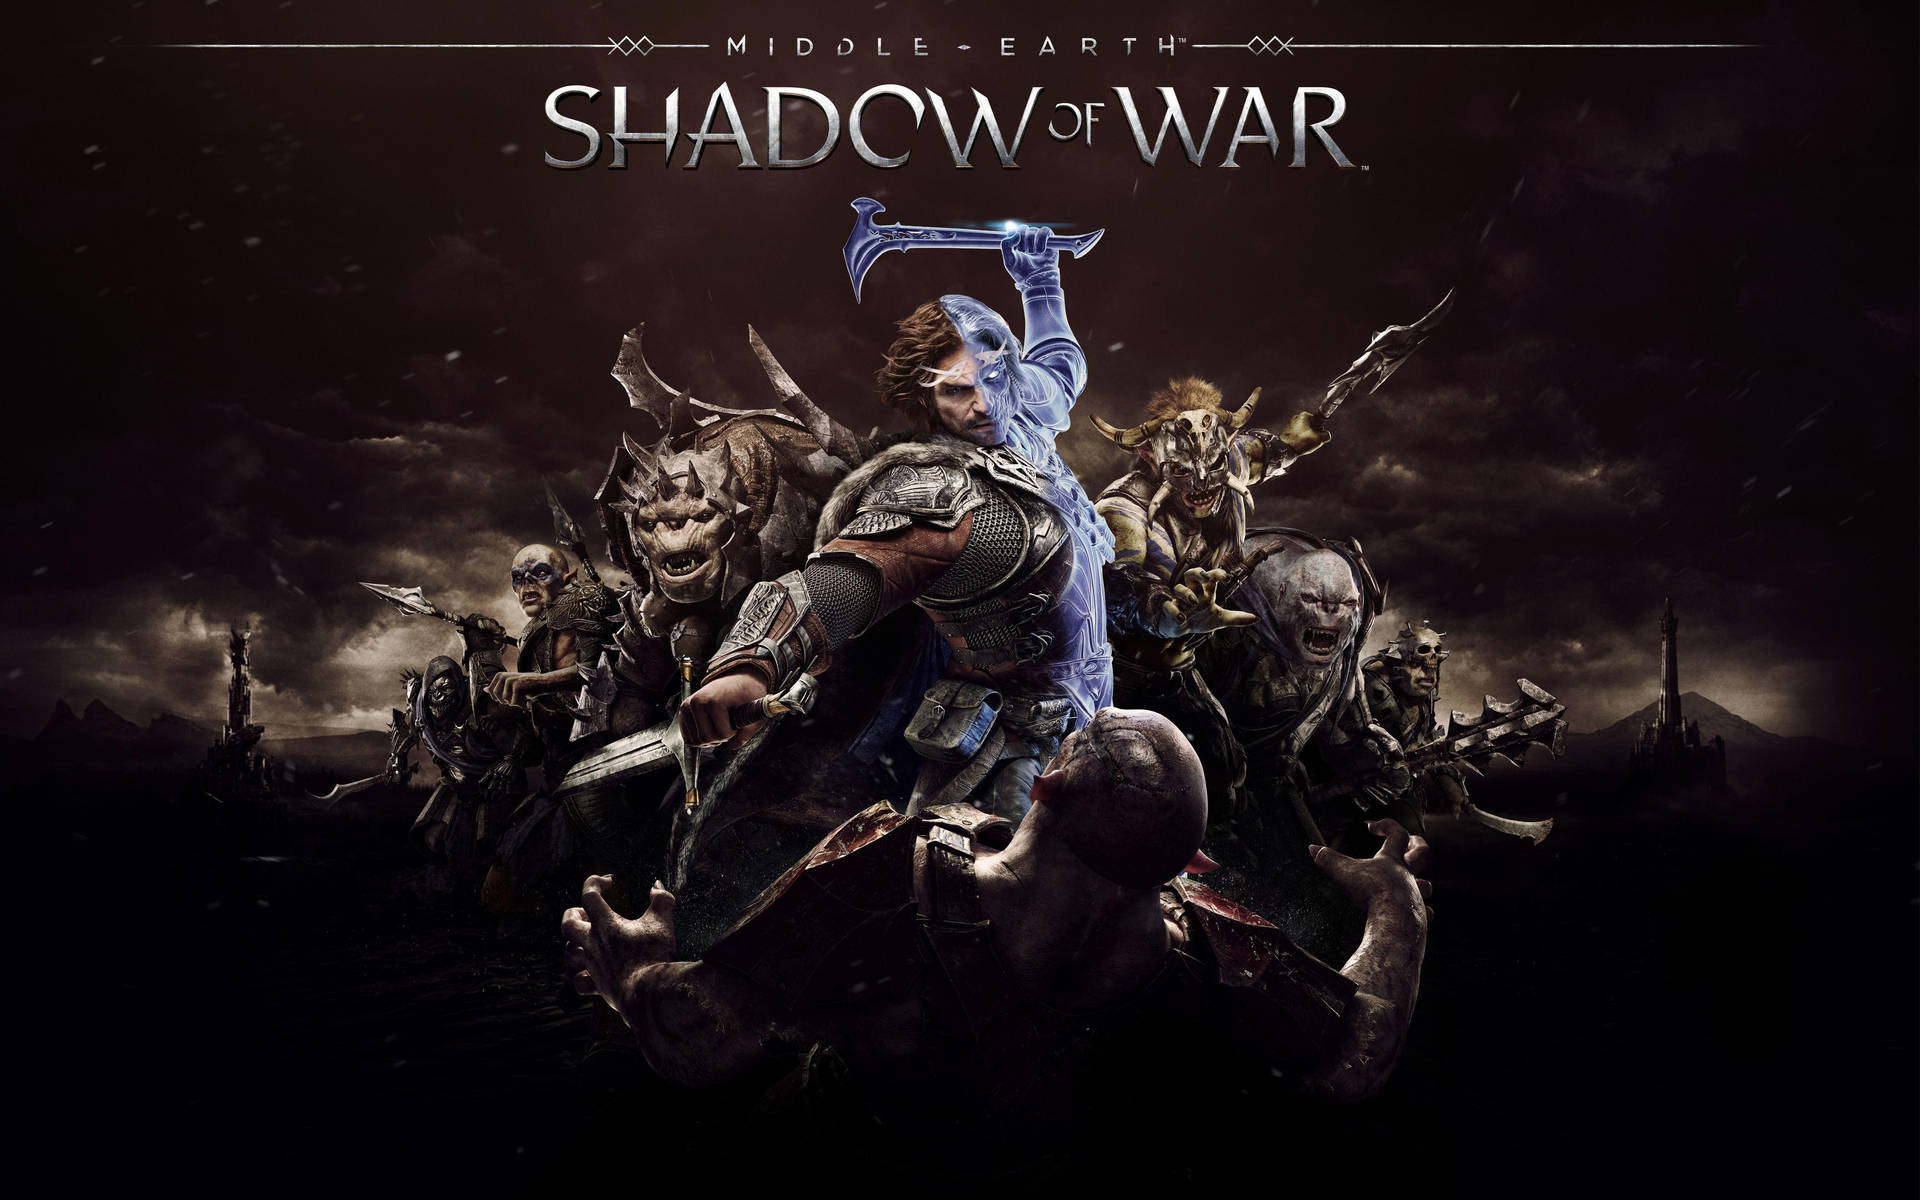 Caption: Heroes Of Middle Earth: Battle In Shadow Of War